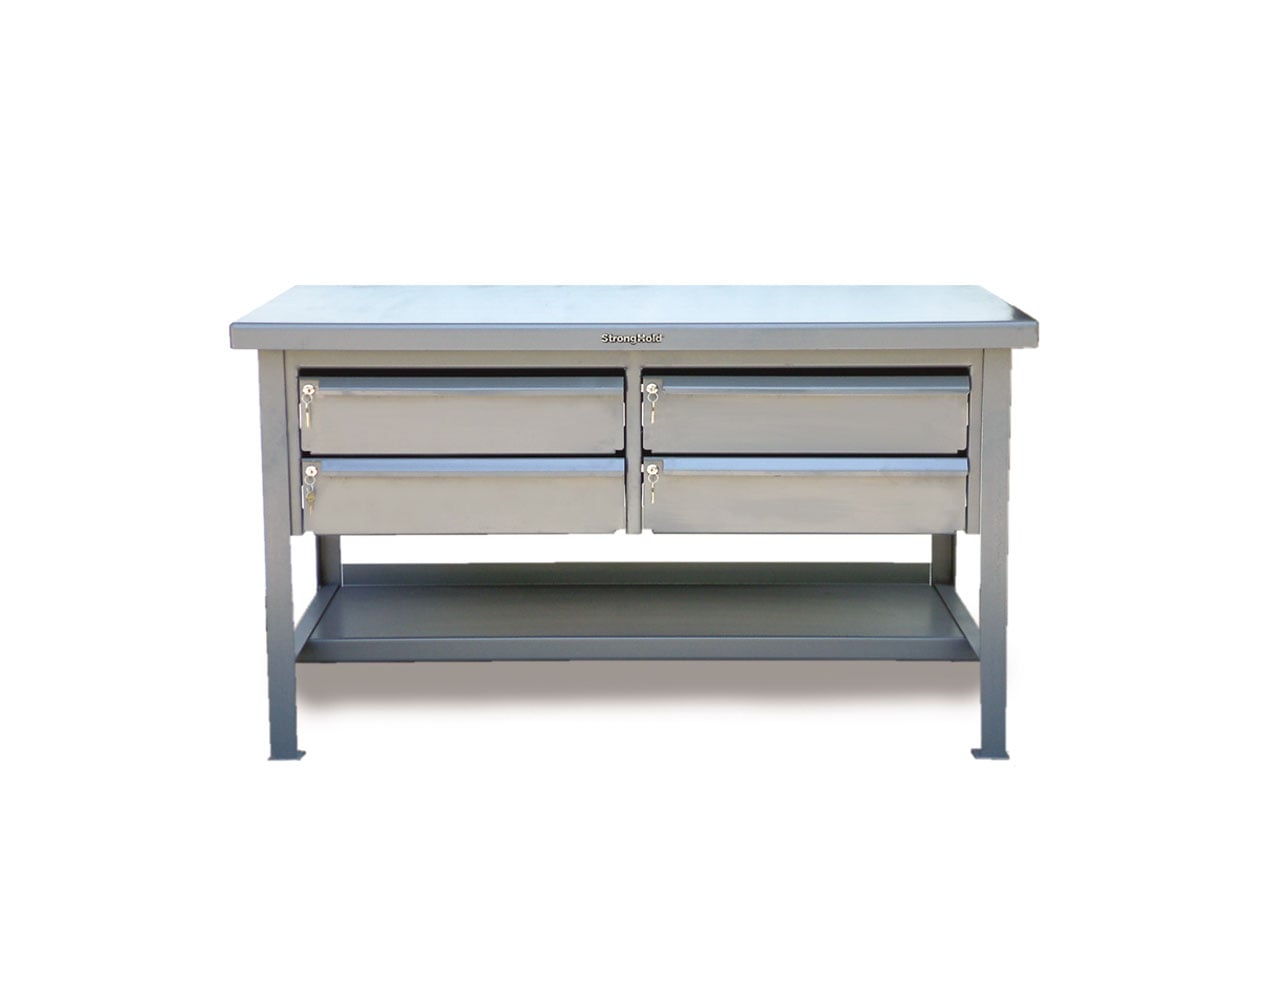 Extreme Duty 7 GA Shop Table with Stainless Steel Top, 4 Keylock Drawers, 1 Shelf - 72 In. W x 36 In. D x 34 In. H